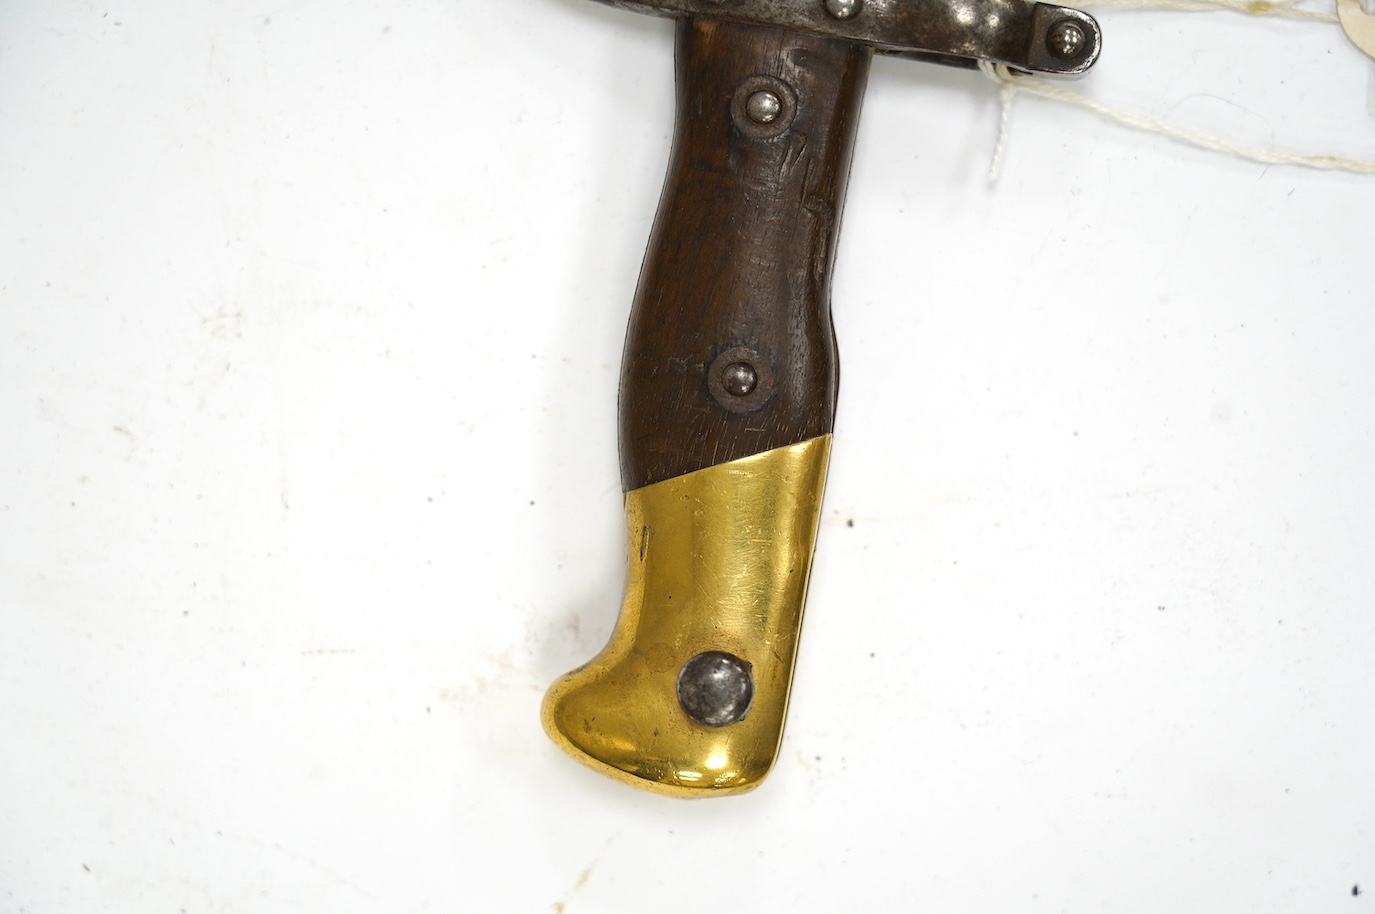 An 1882 French T section bayonet for a Gras rifle. Condition - good